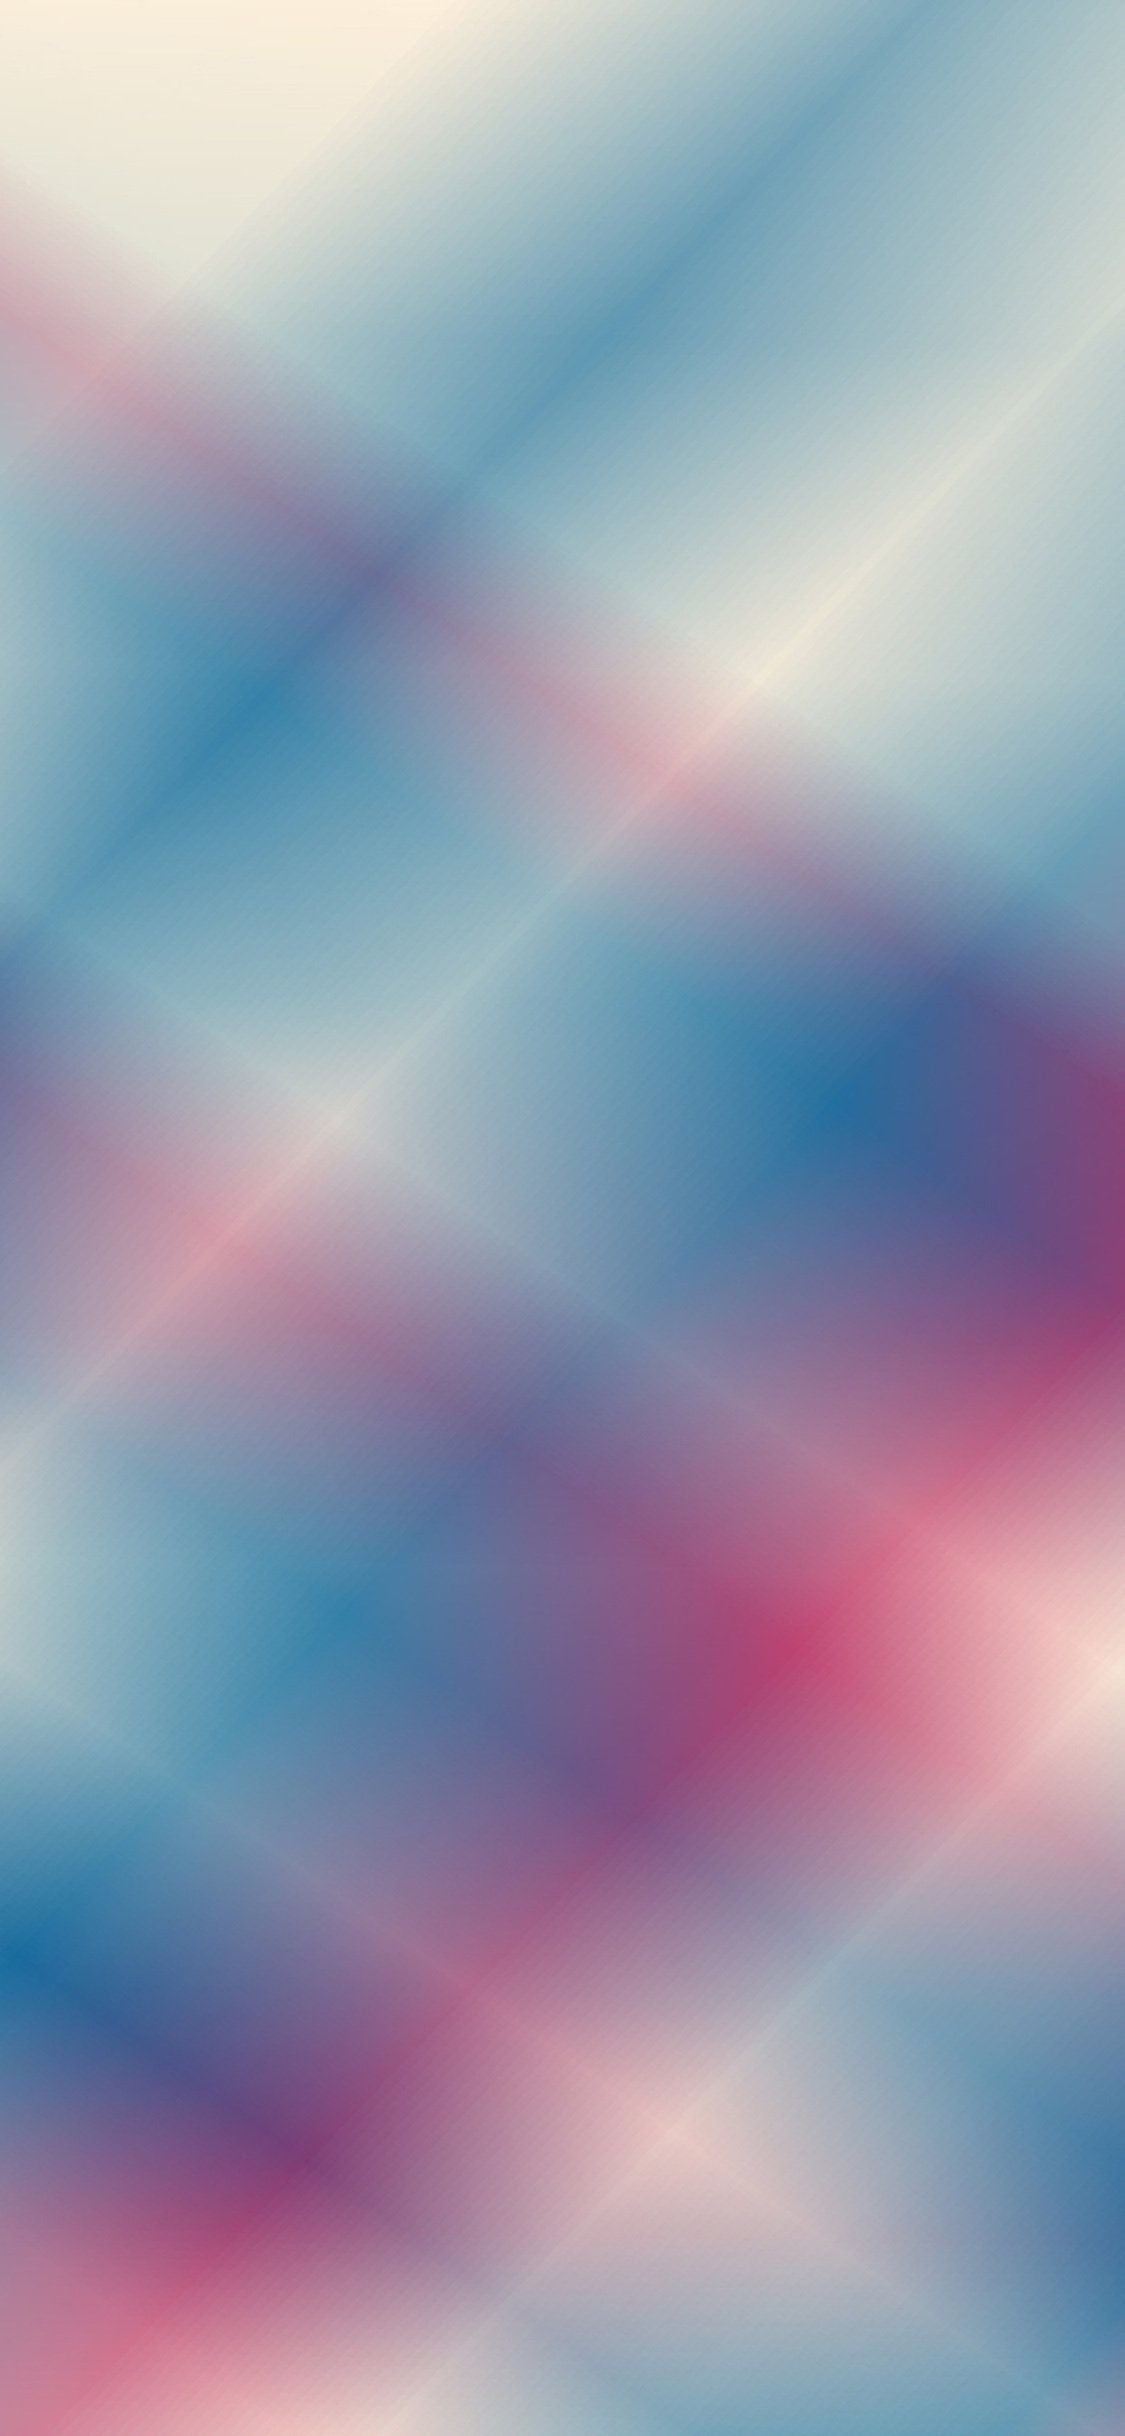 HD Iphone x wallpapers blurry and image collection for Desktop & Mobile